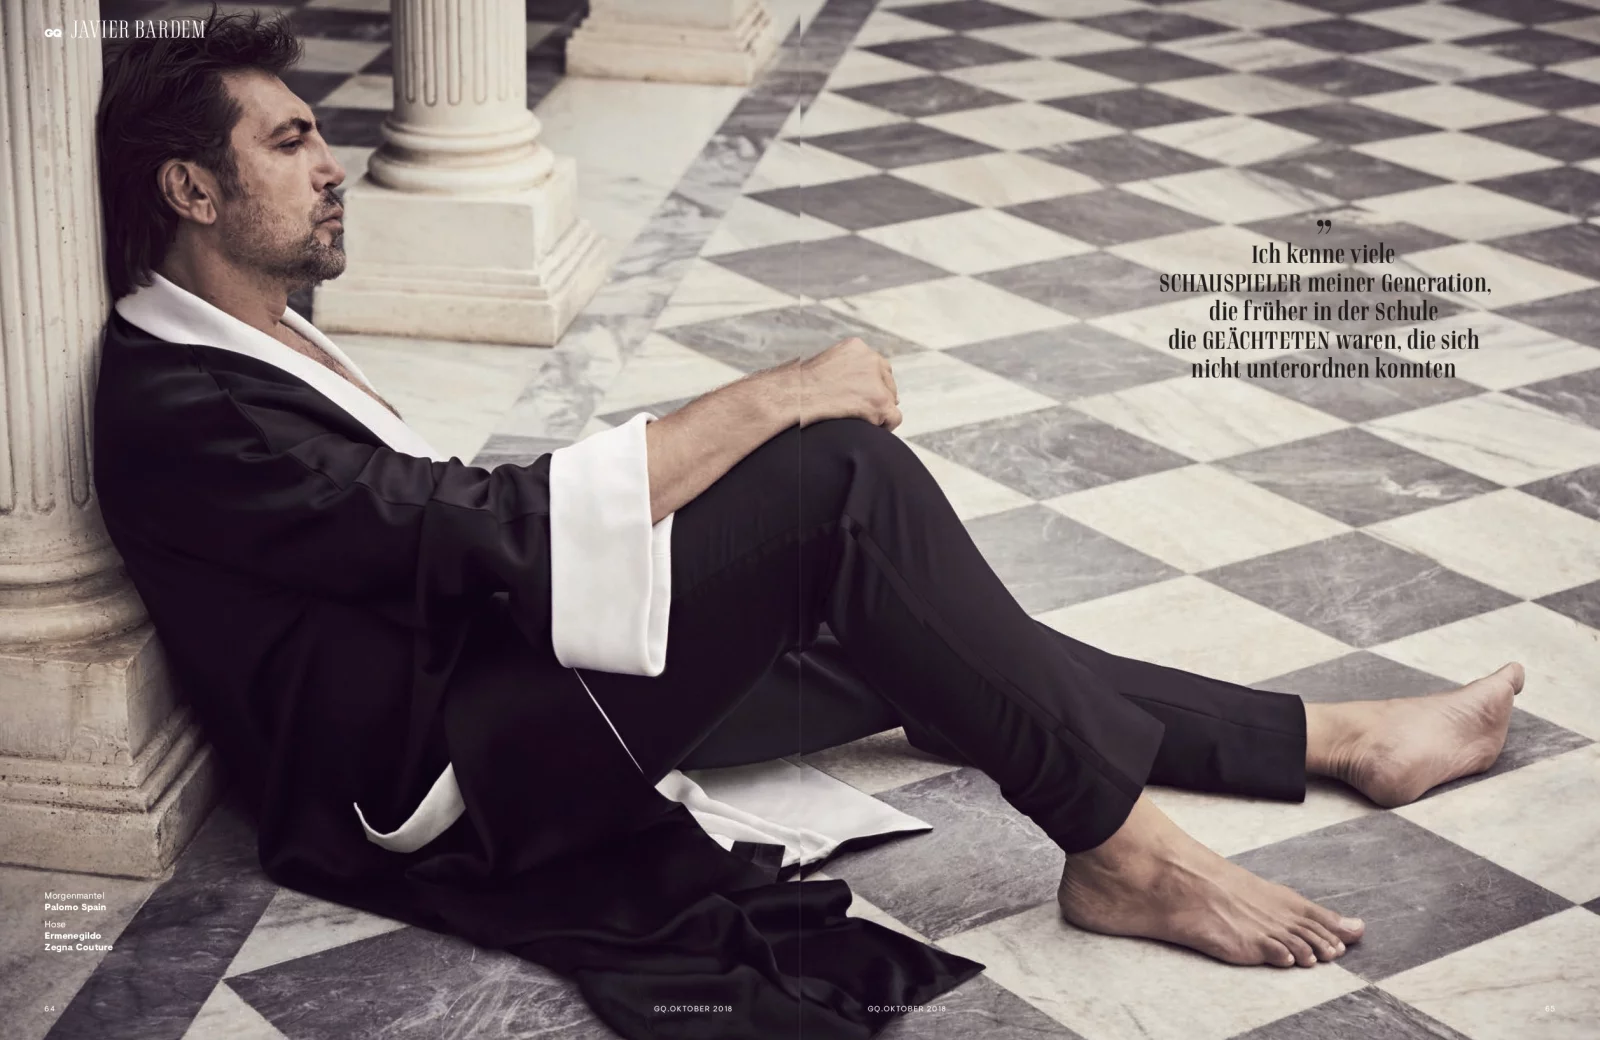 GQ with Javier Bardem 3 by Claudia ENGLMANN